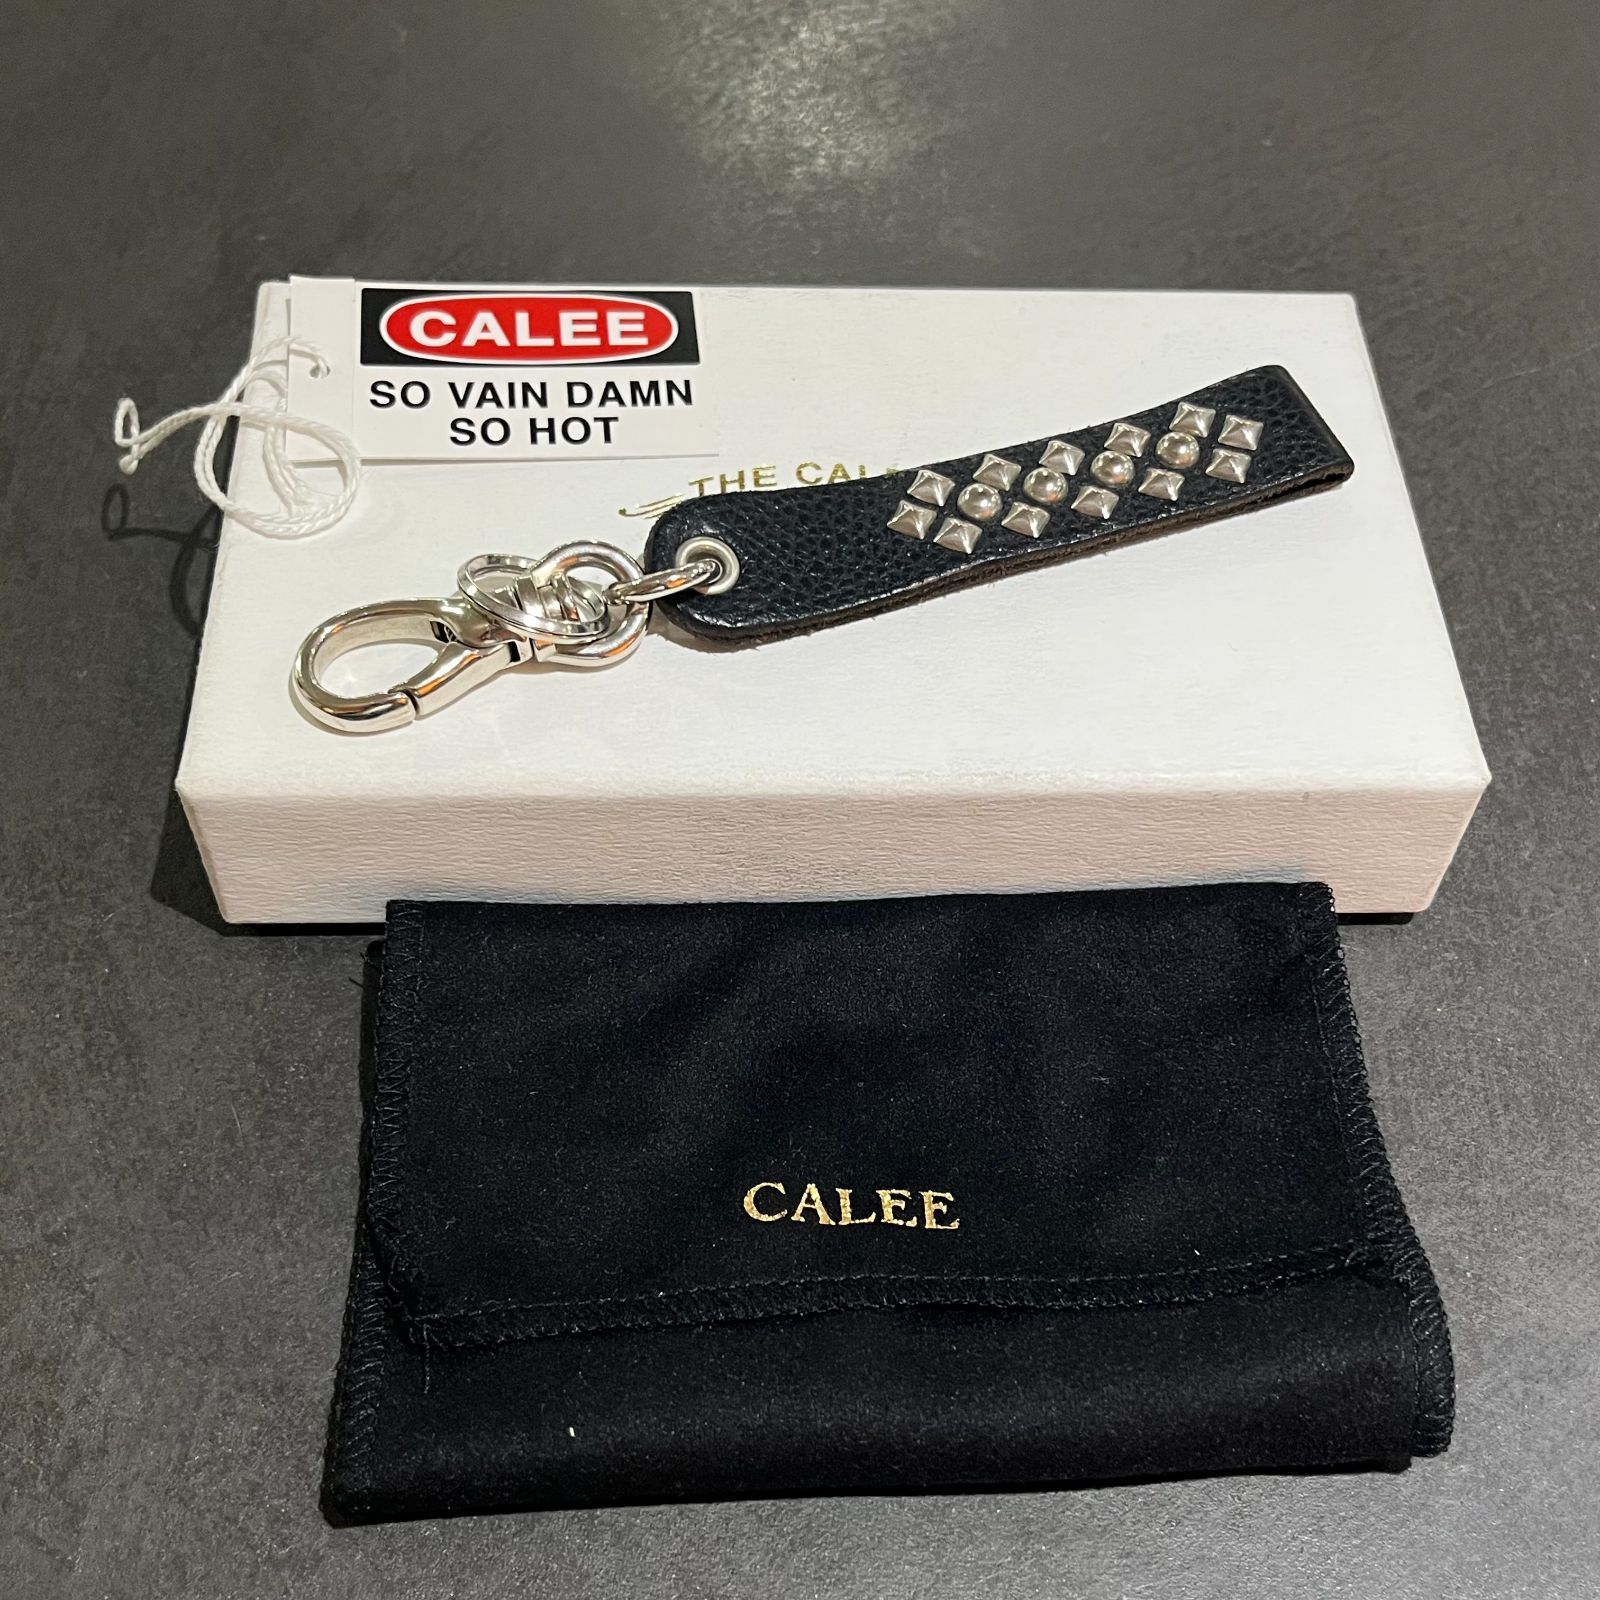 CALEE Studs & Embossing assort leather key ring D スタッズ レザー